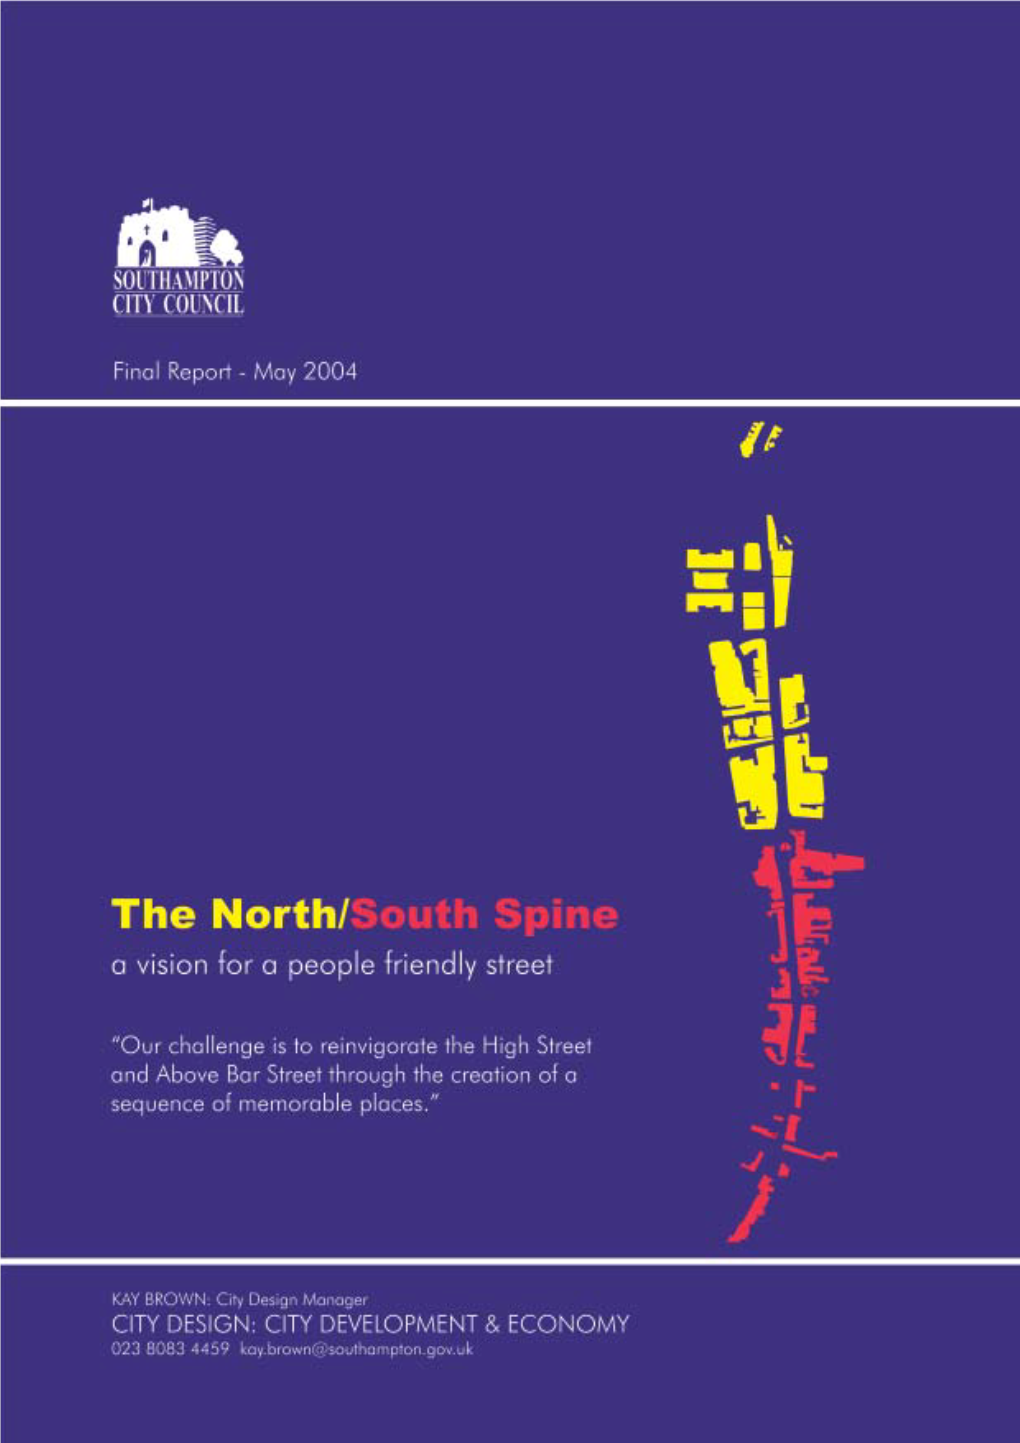 The North/South Spine